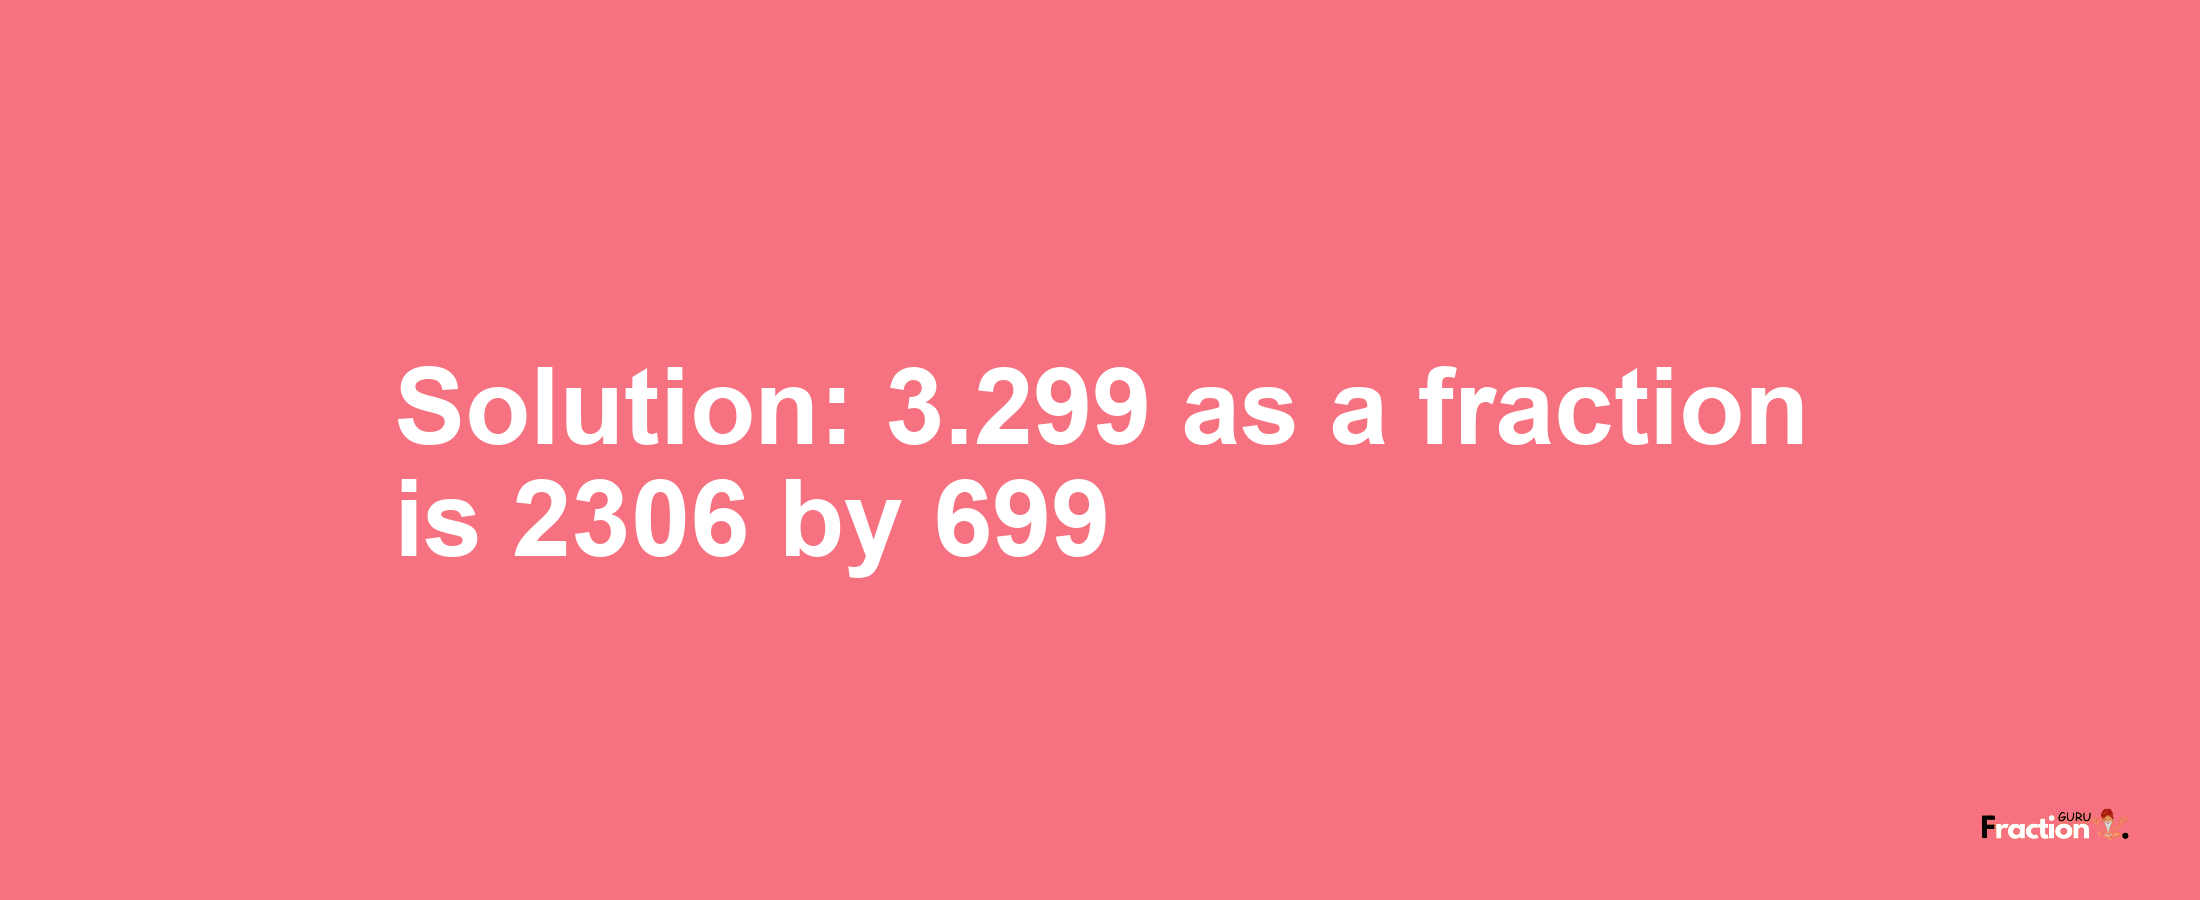 Solution:3.299 as a fraction is 2306/699